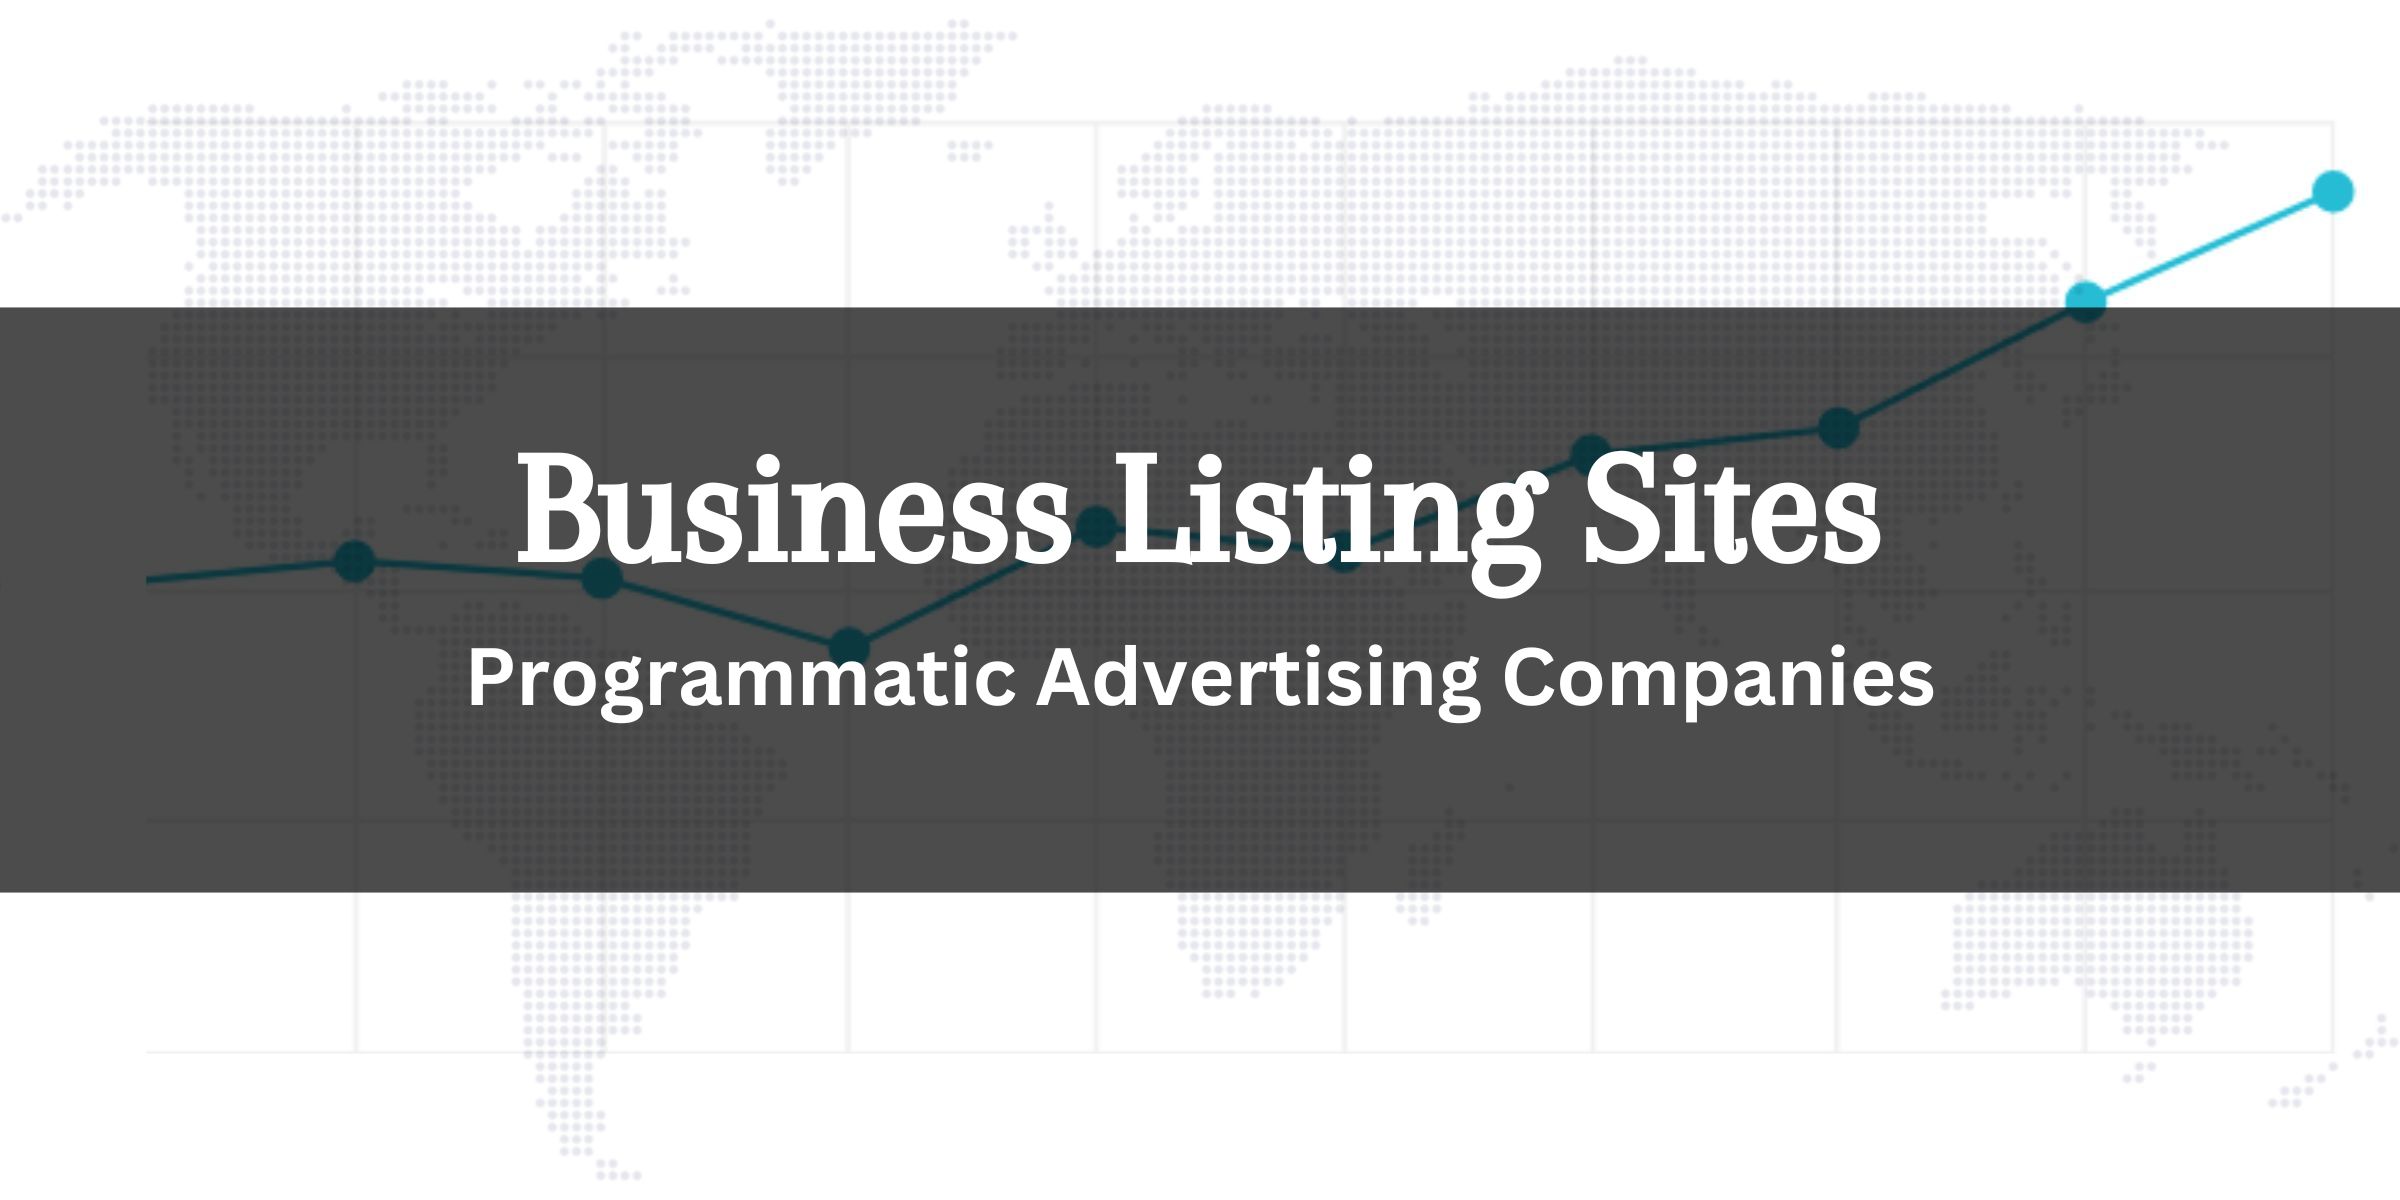 free business listing websites for Programmatic Advertising Companies